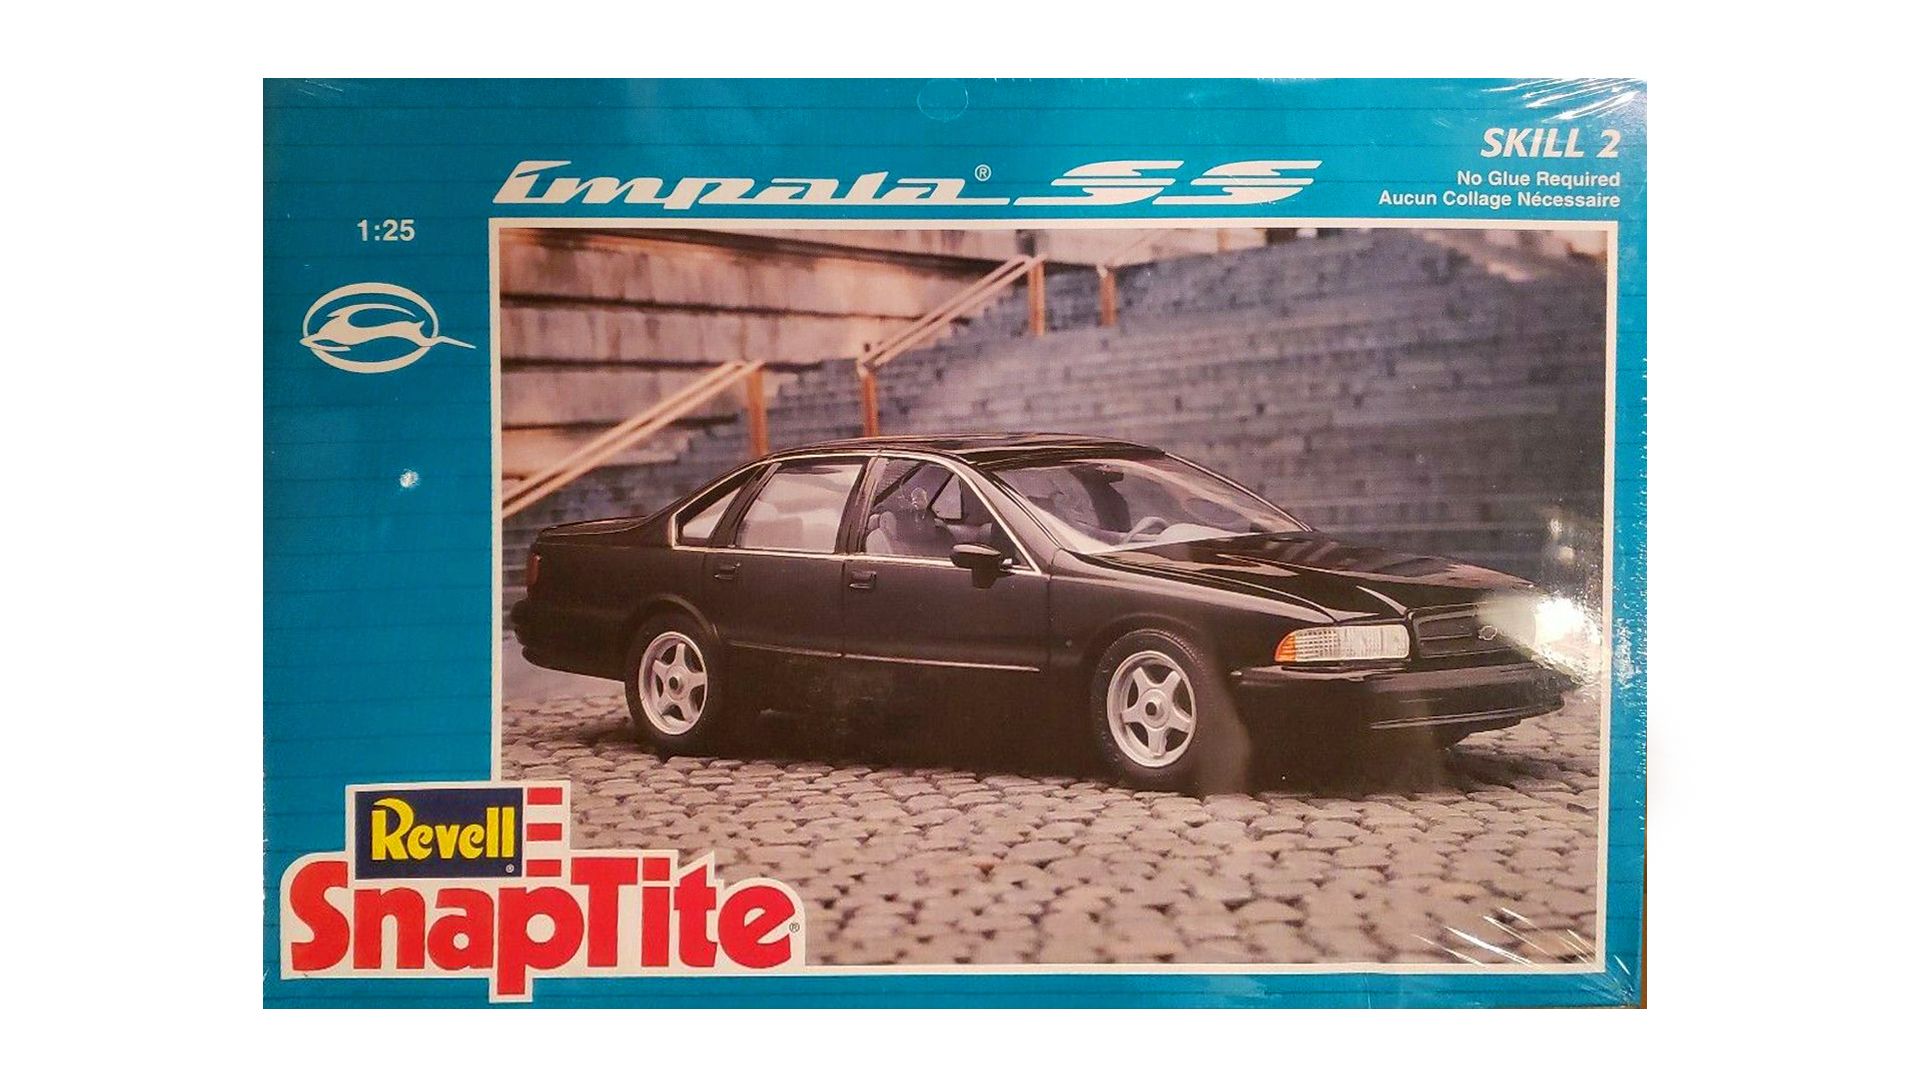 Revell's SnapTite line also included many road cars, but NASCAR and hot rod offerings were also popular.